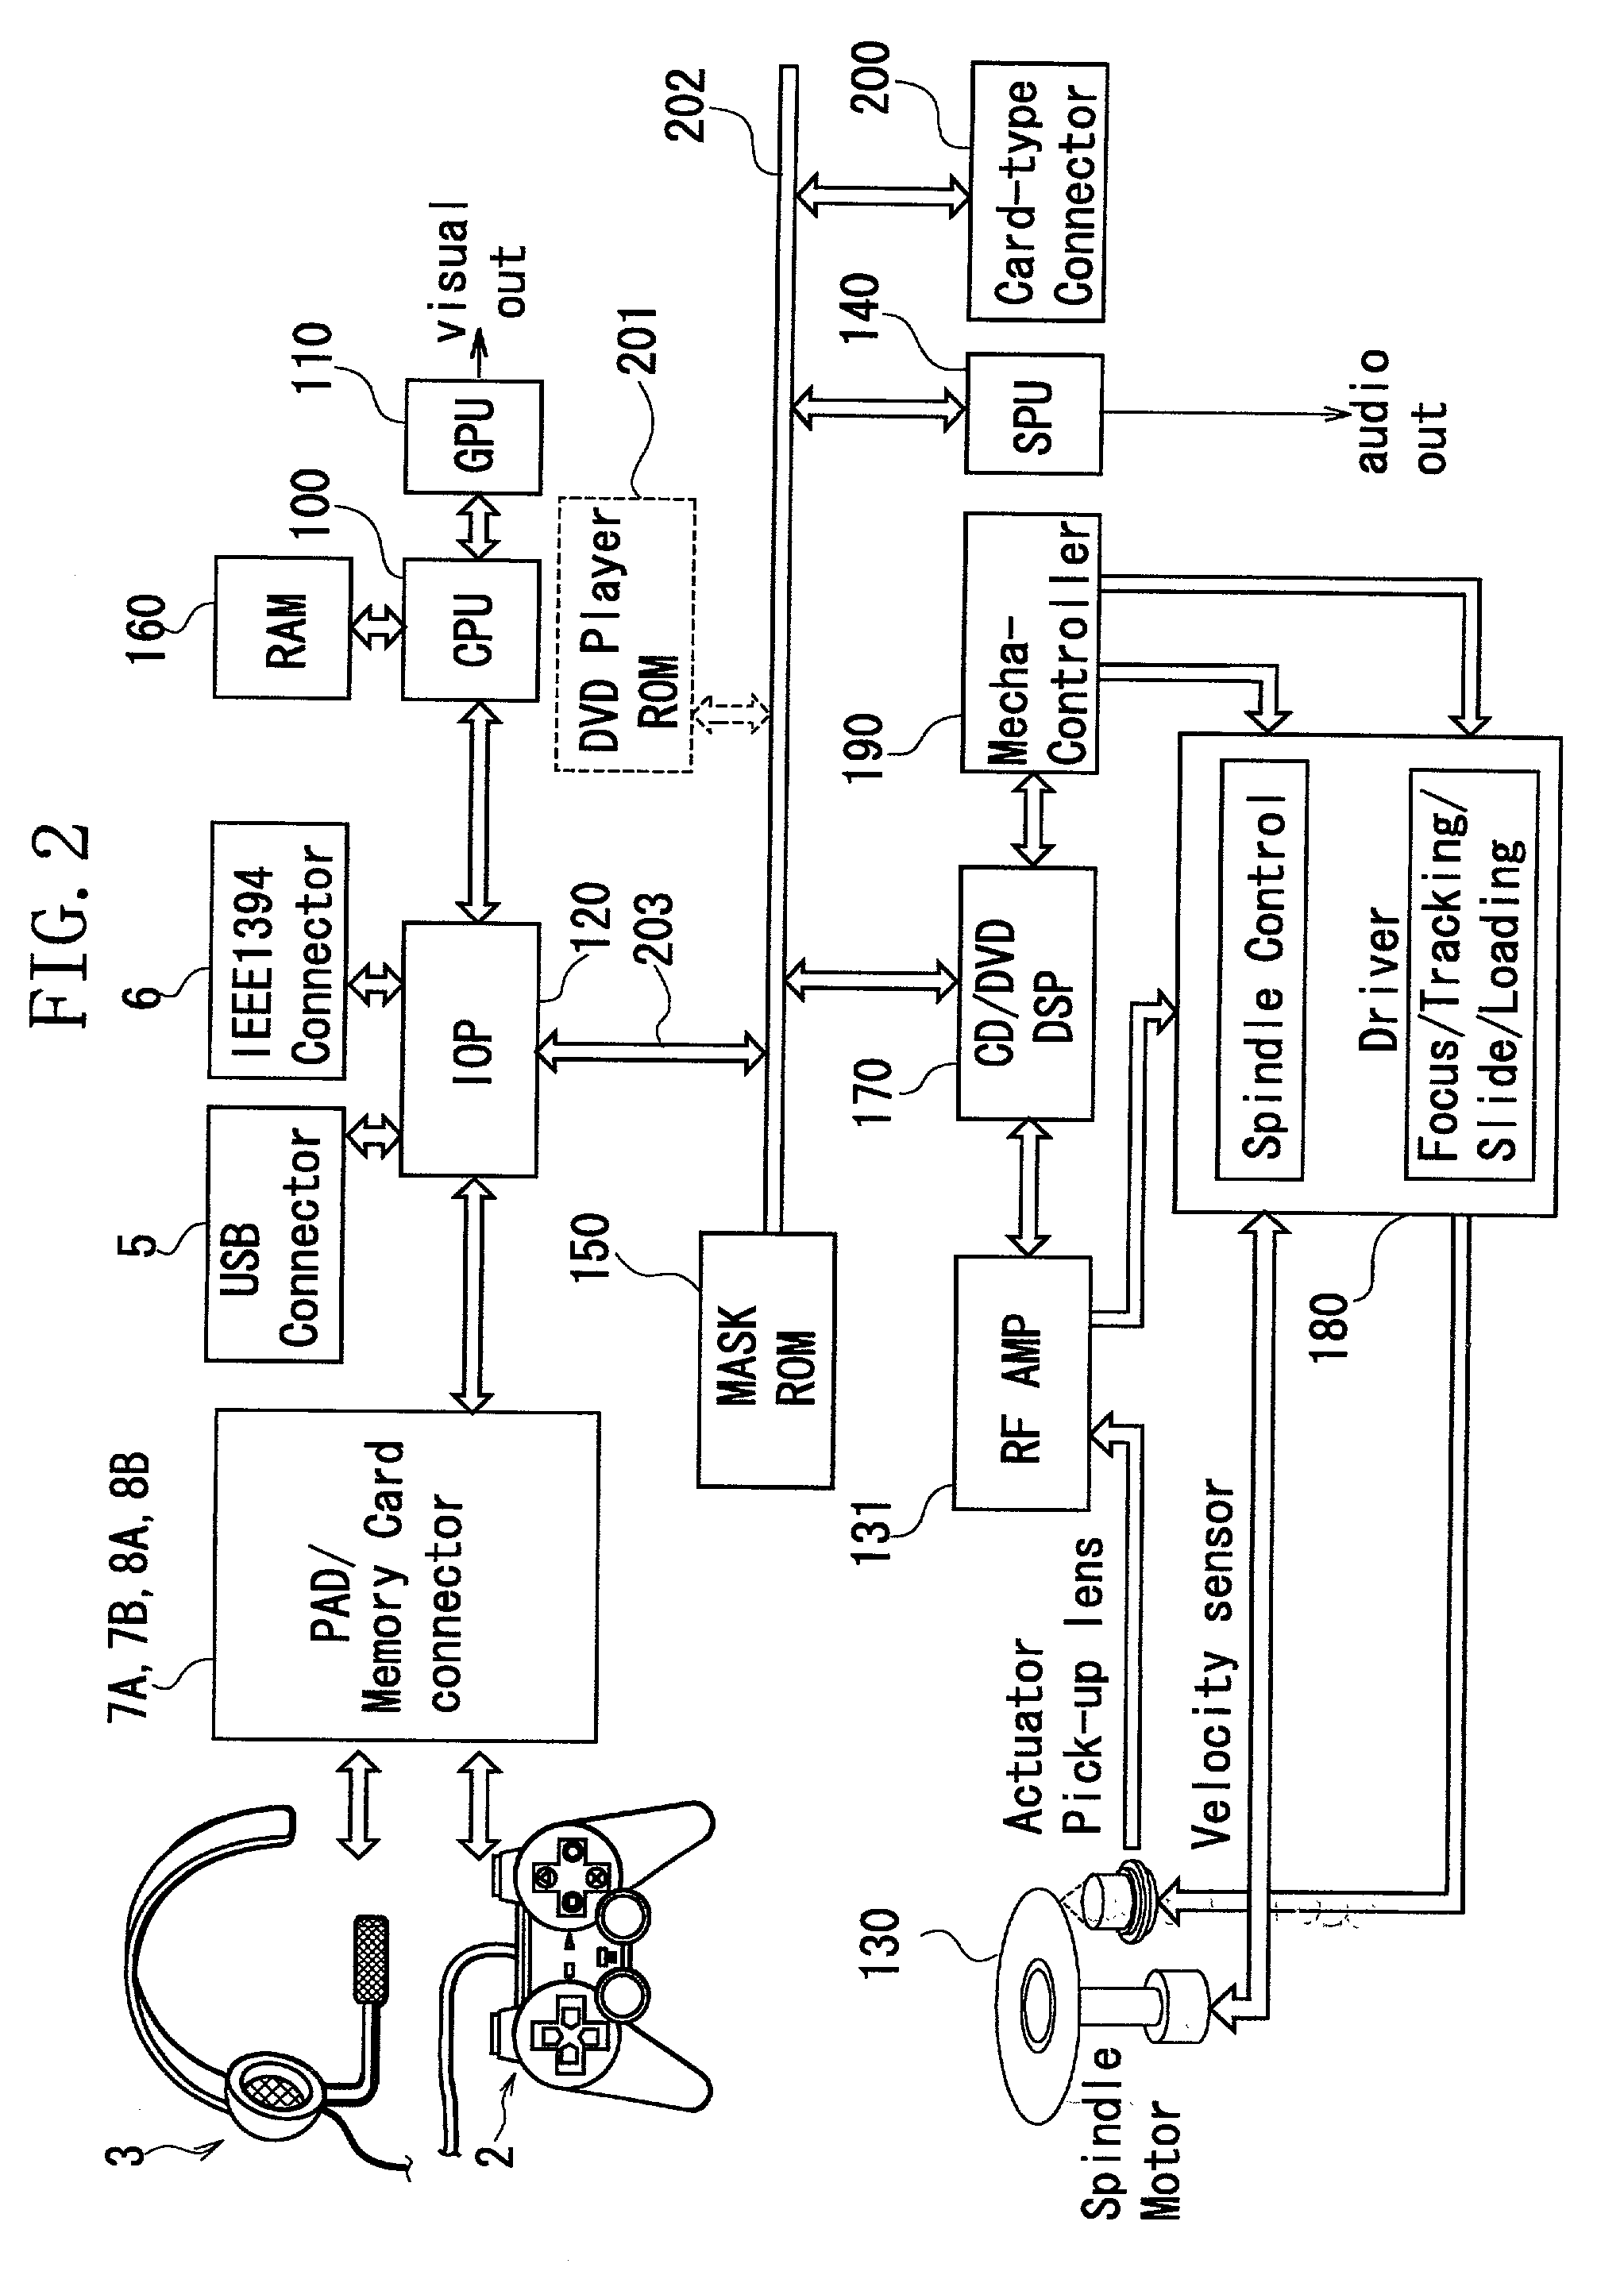 Sound control method and device for expressing game presence